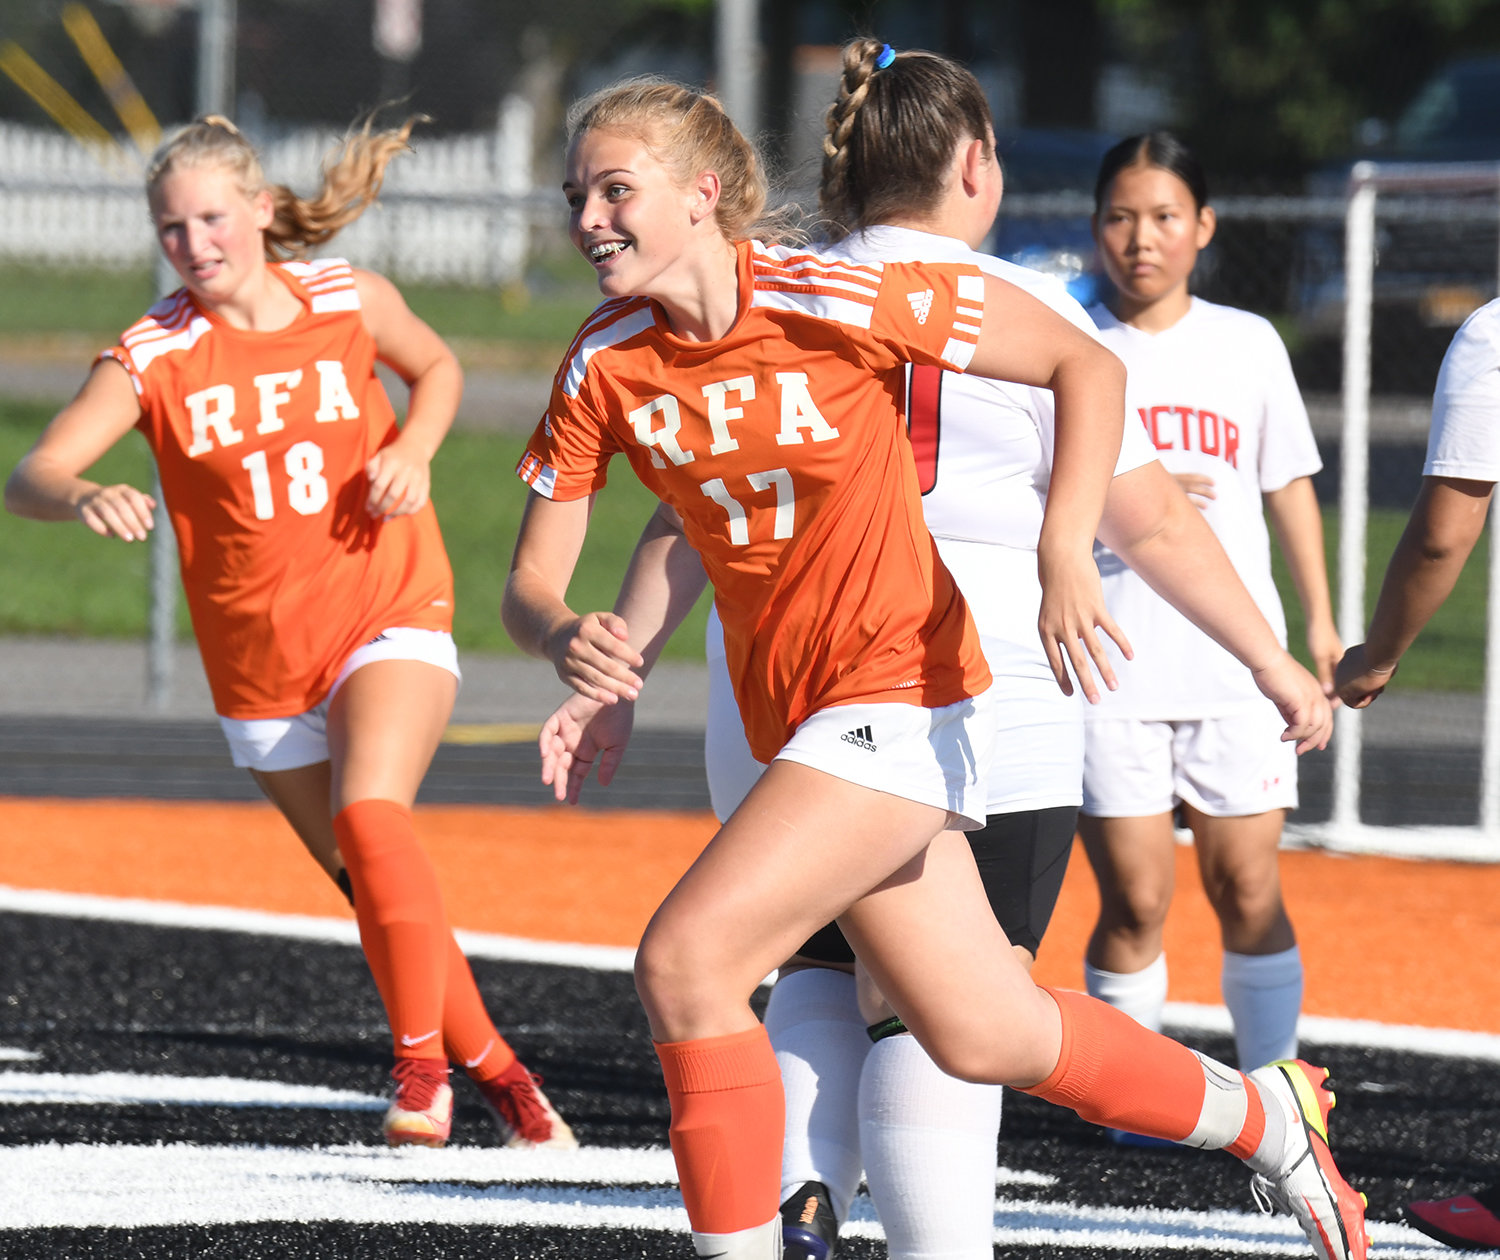 Amelia Furbeck runs away from the goal after scoring Rome Free Academy’s first goal of the game against Utica Proctor Thursday at RFA Stadium. She scored twice and the Black Knights won 10-0.